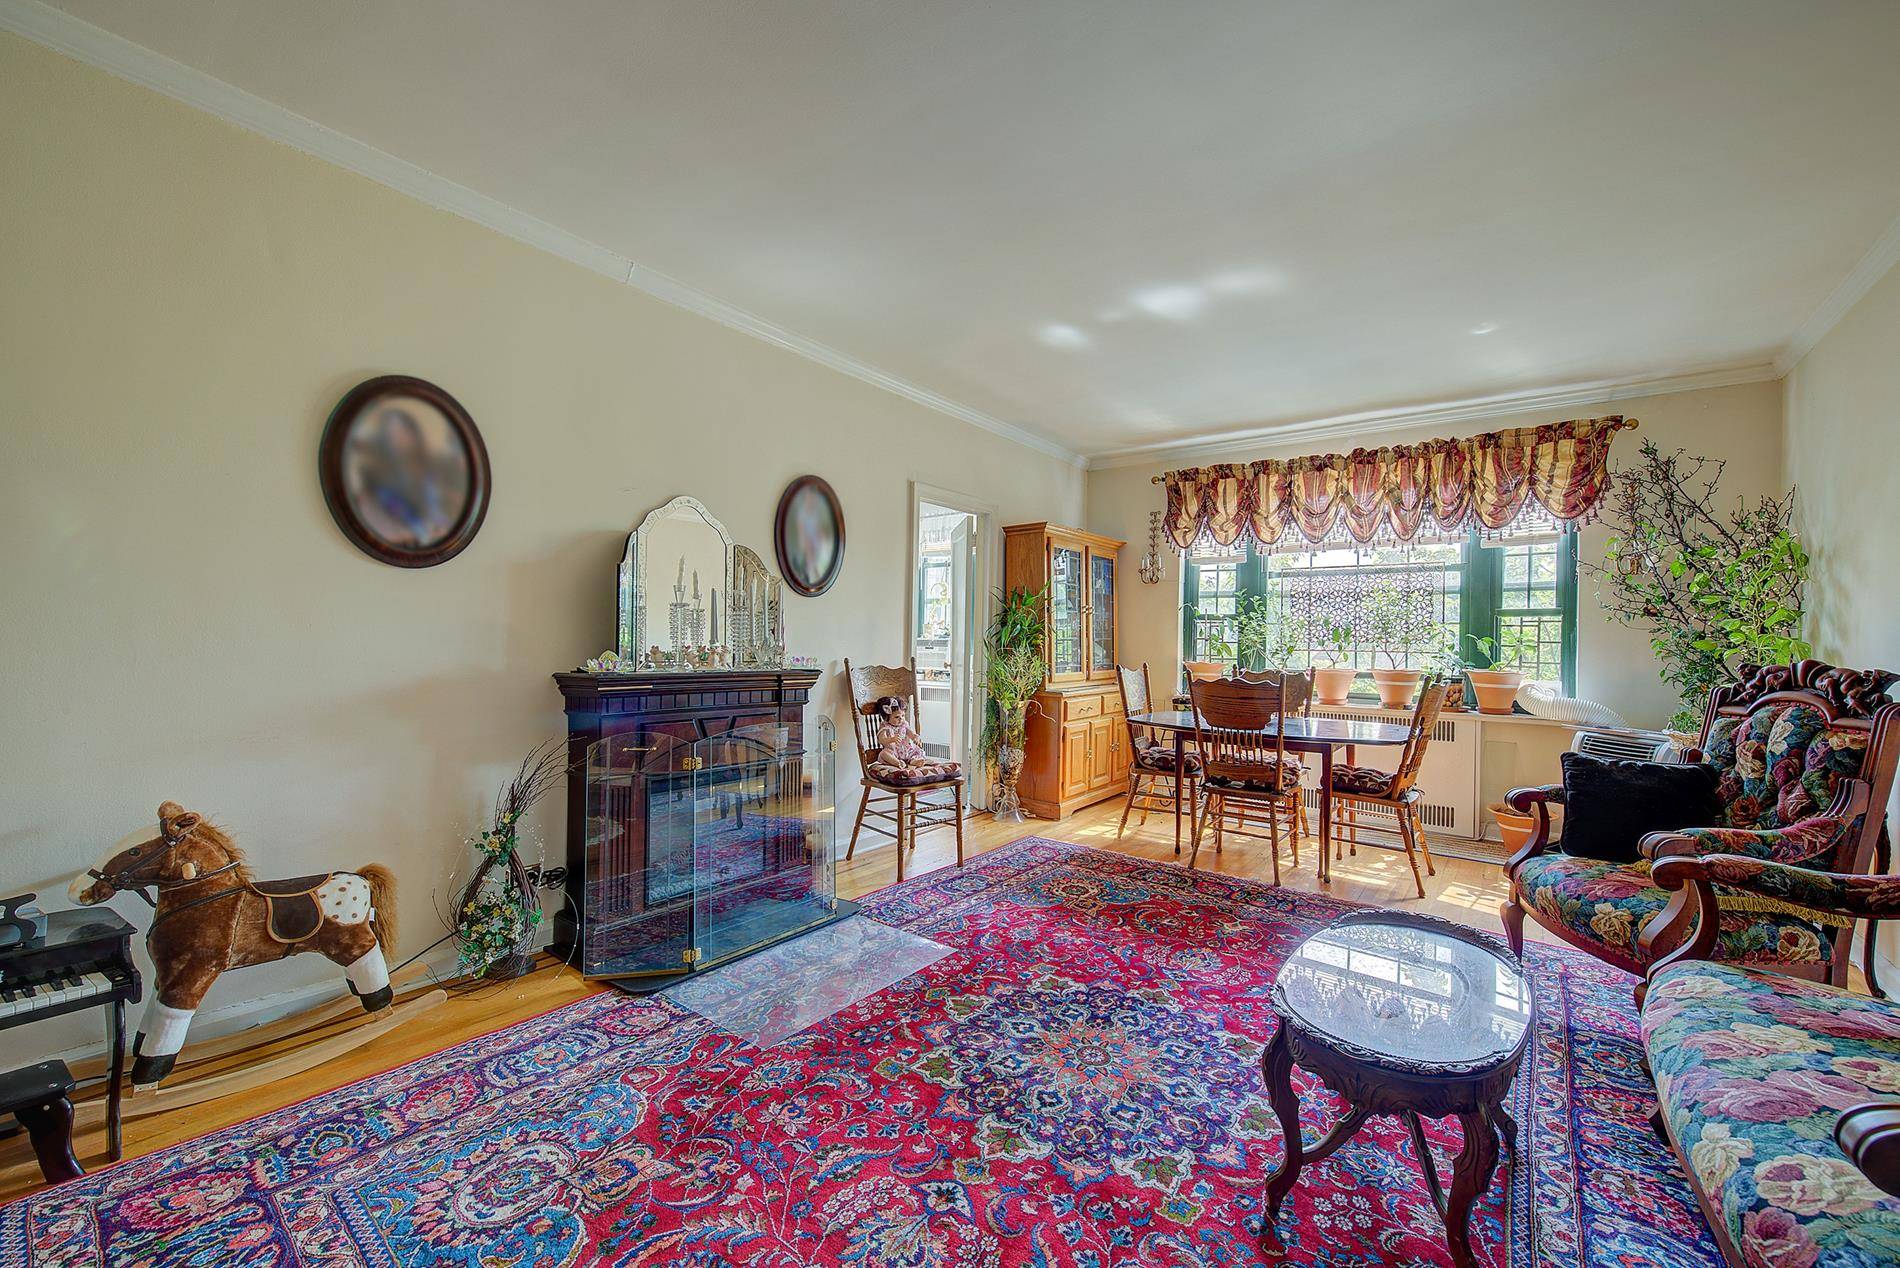 Welcome to this rare gem of an apartment in the charming neighborhood of Forest Hills.